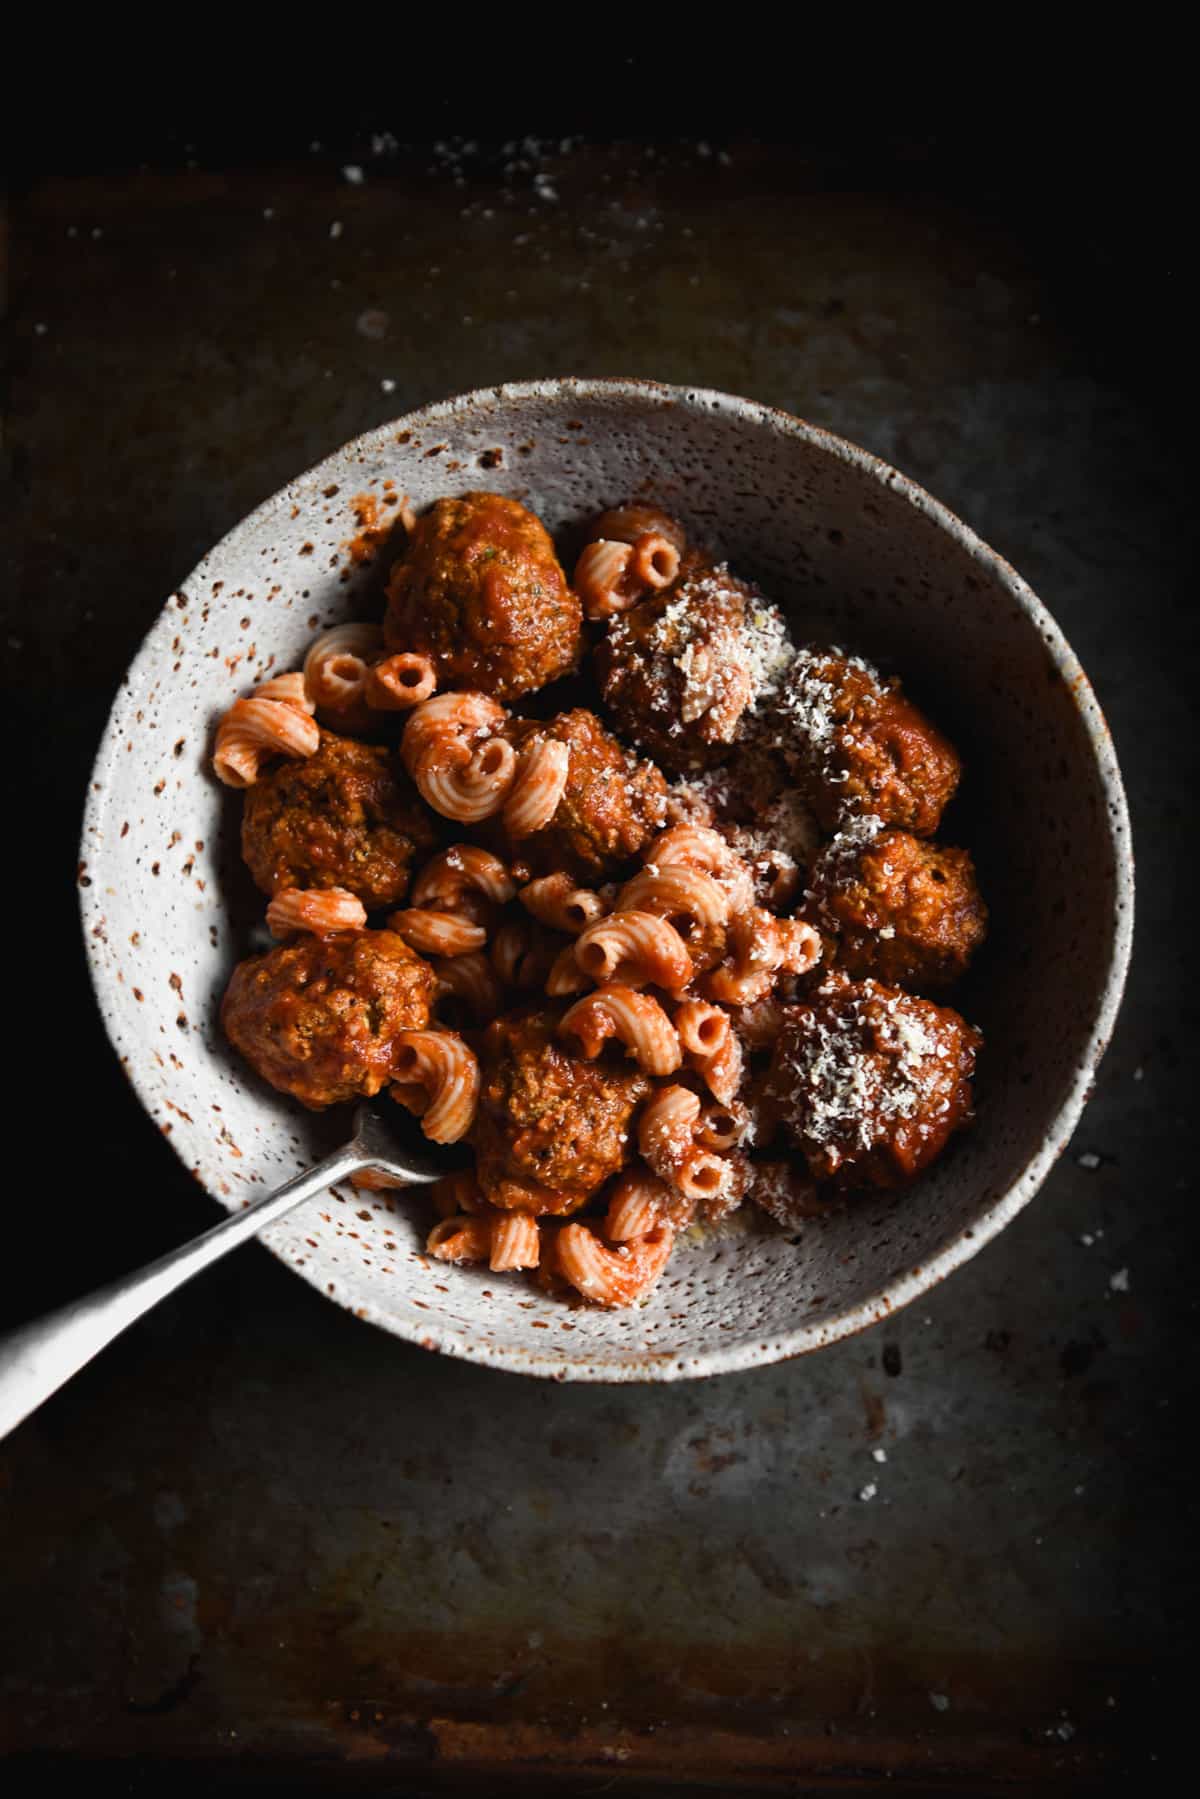 Vegan FODMAP friendly meatballs with a tomato based sauce on gluten free pasta in a white ceramic bowl on a dark steel backdrop. 